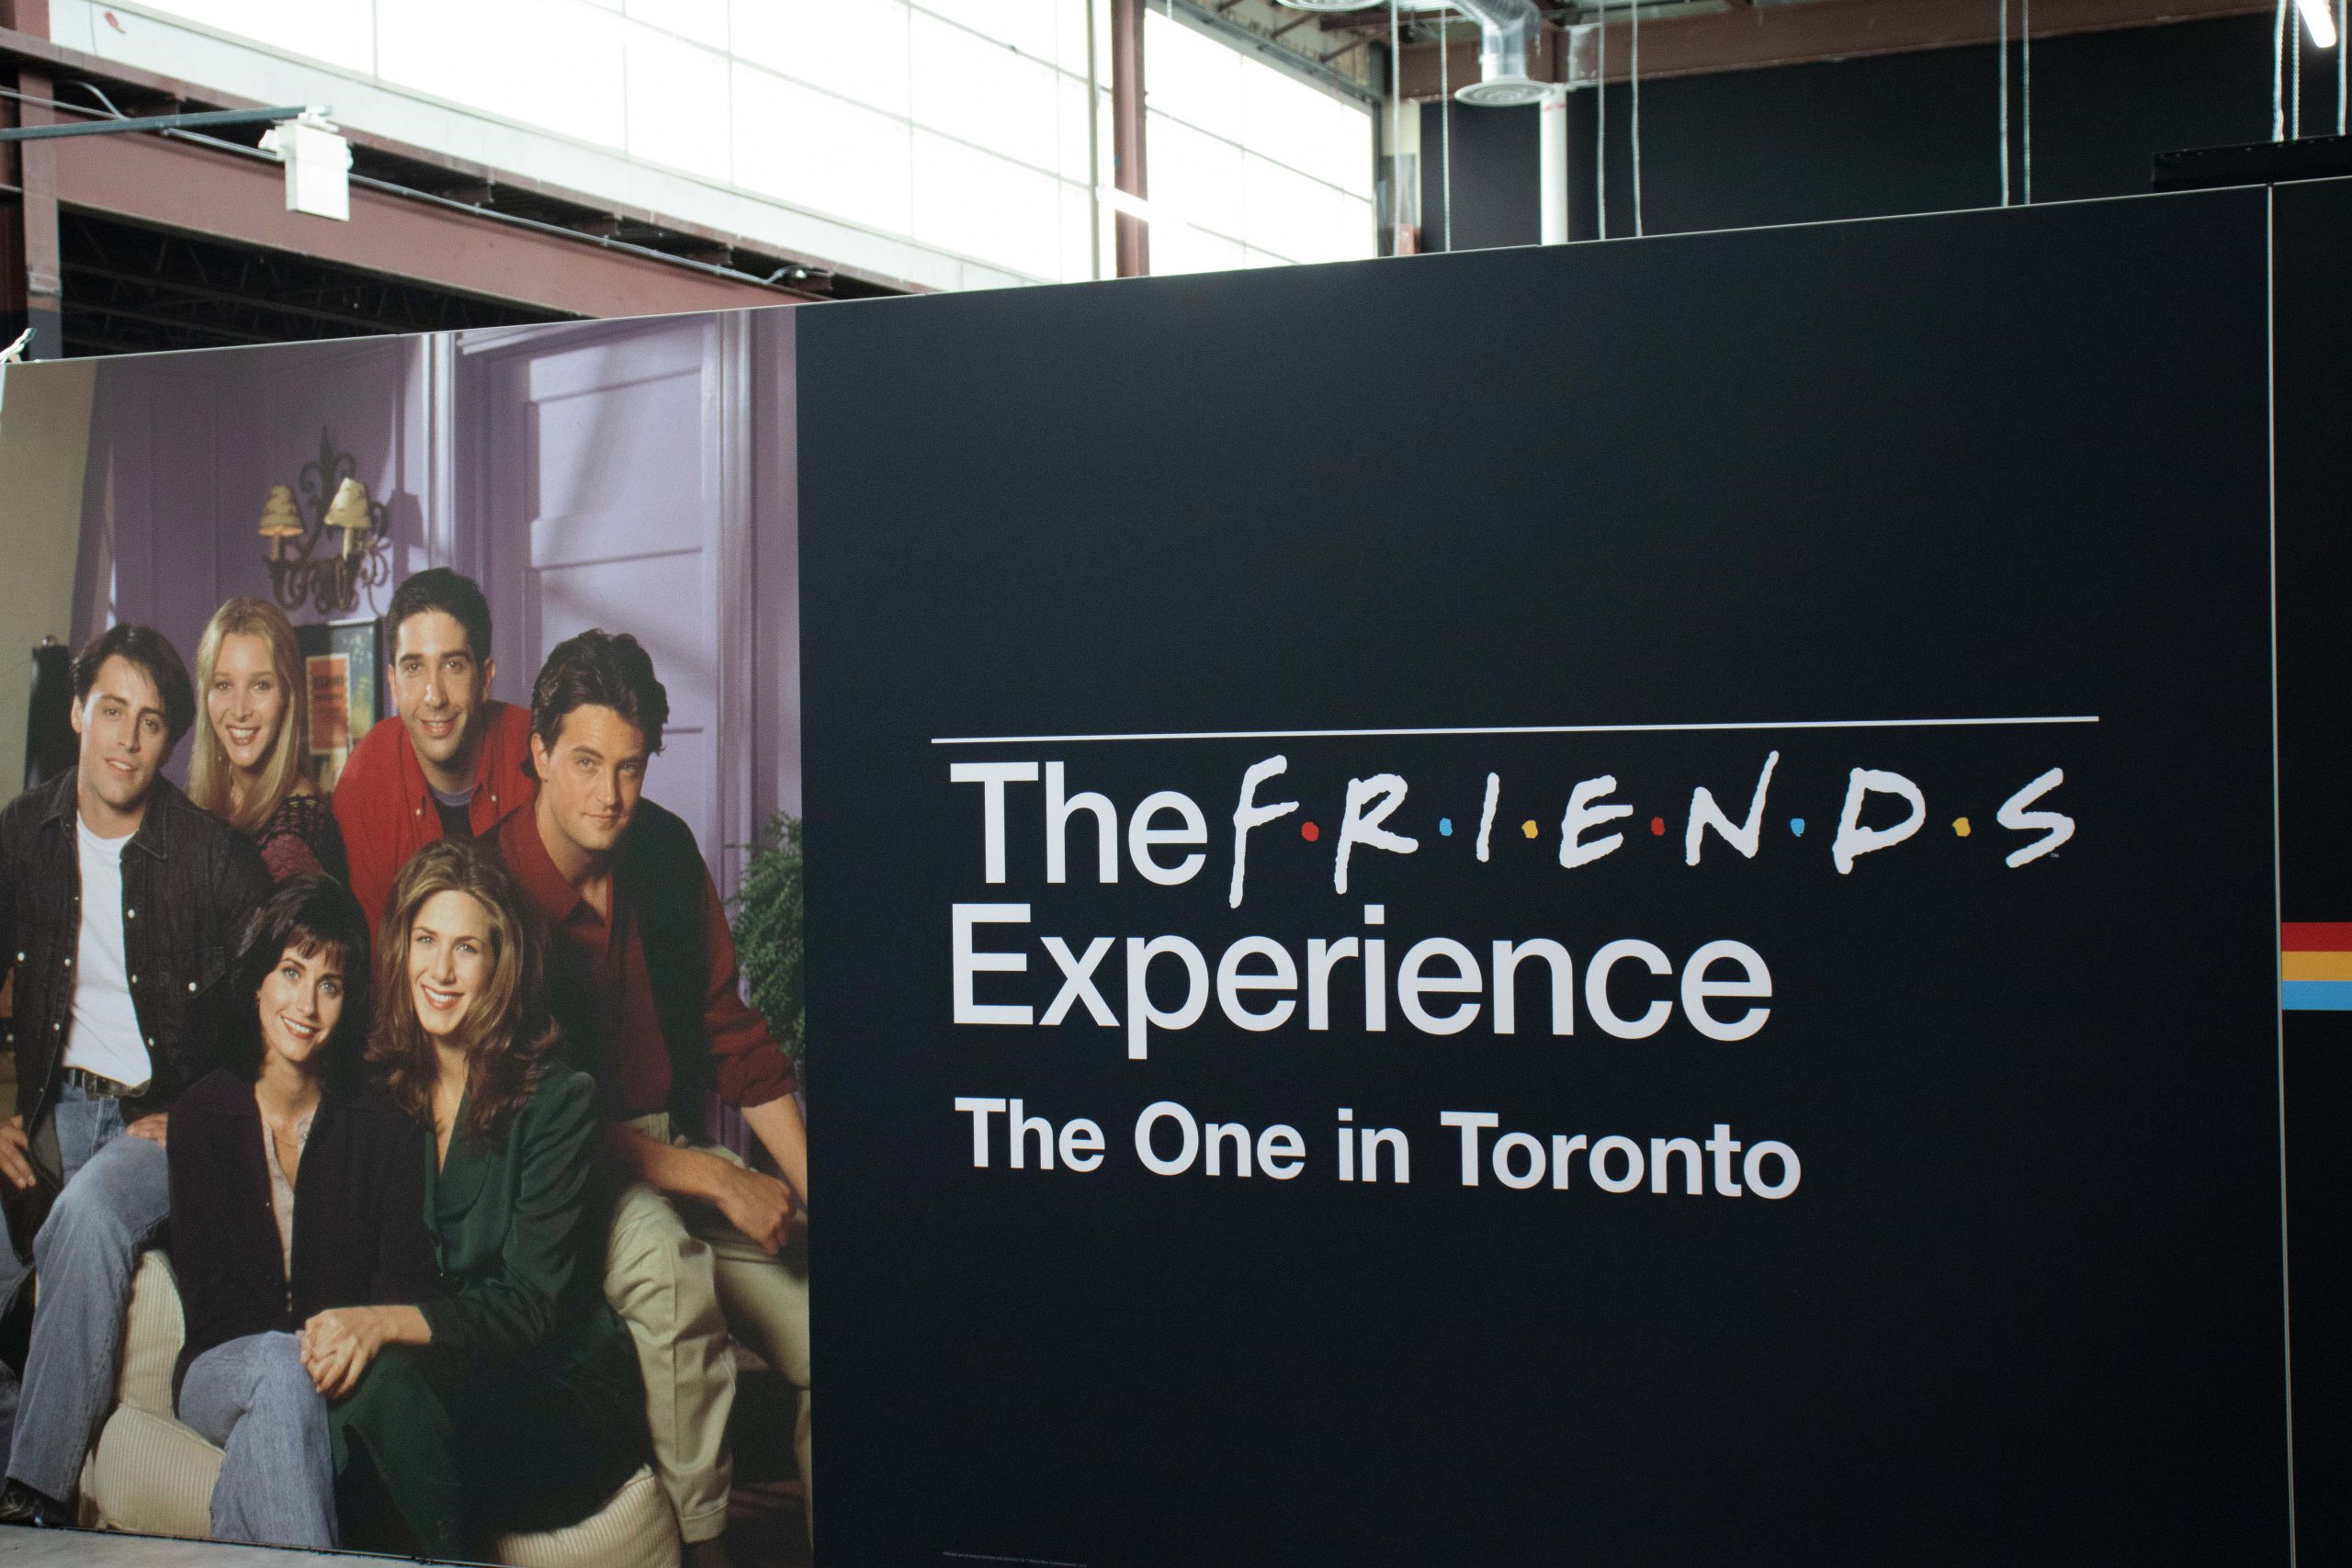 One of the first things you see when you enter The FRIENDS Experience is this sign!